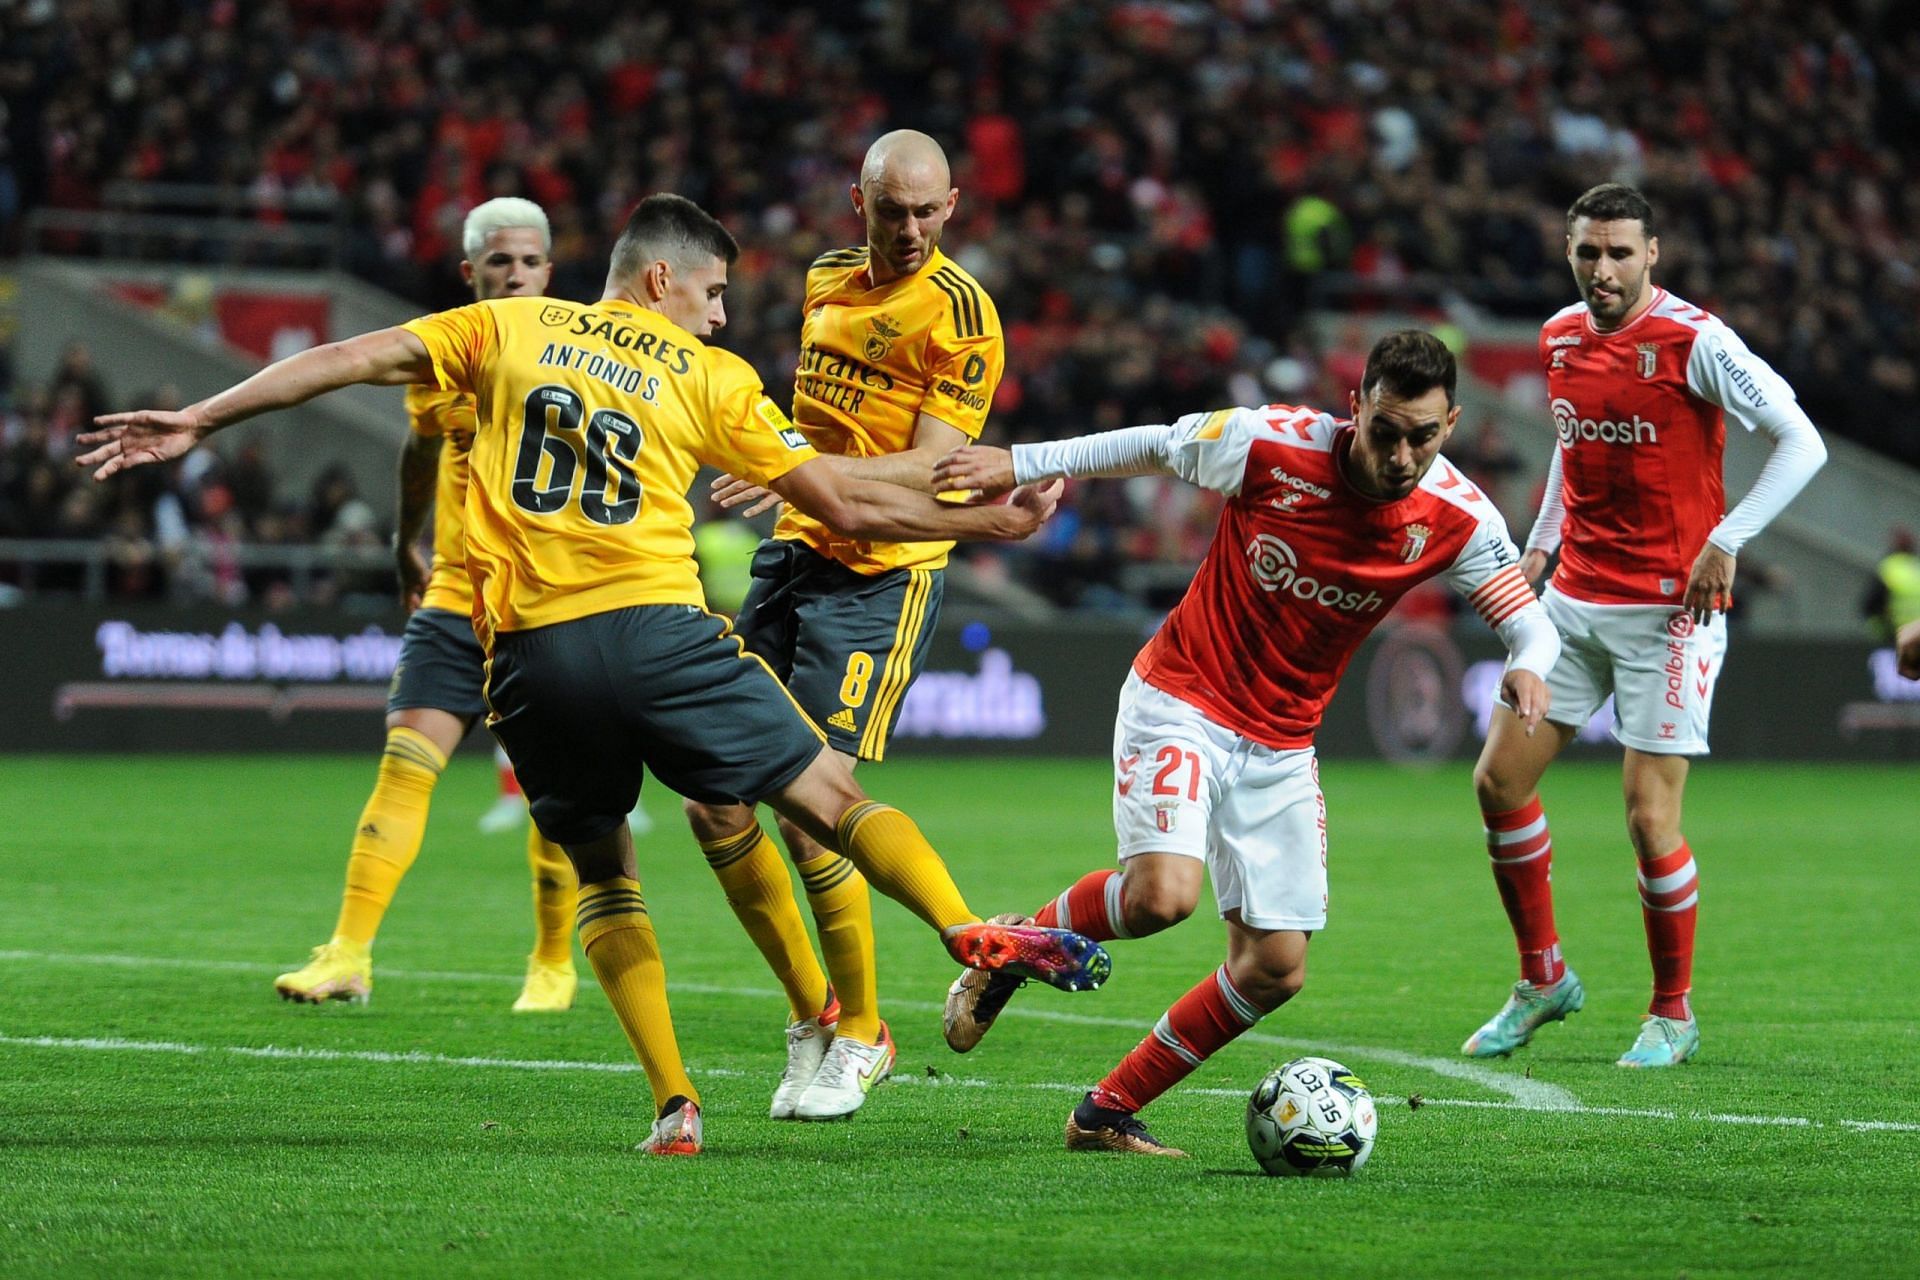 Braga and Benfica will meet in the quarter-finals of the Taxa de Portugal on Thursday 